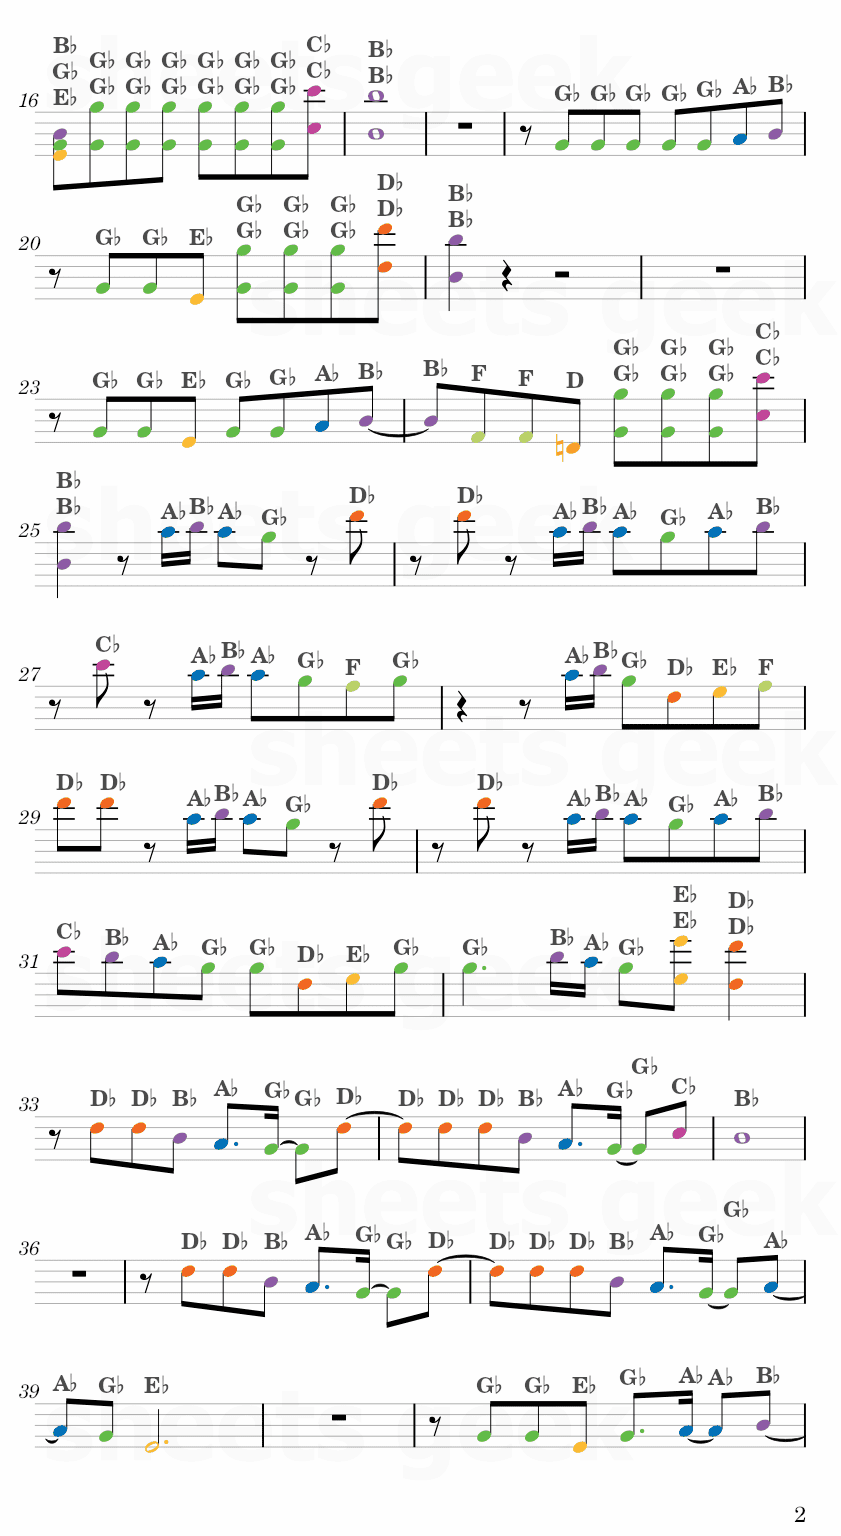 Die In A Fire - Living Tombstone FNAF3 Easy Sheet Music Free for piano, keyboard, flute, violin, sax, cello page 2